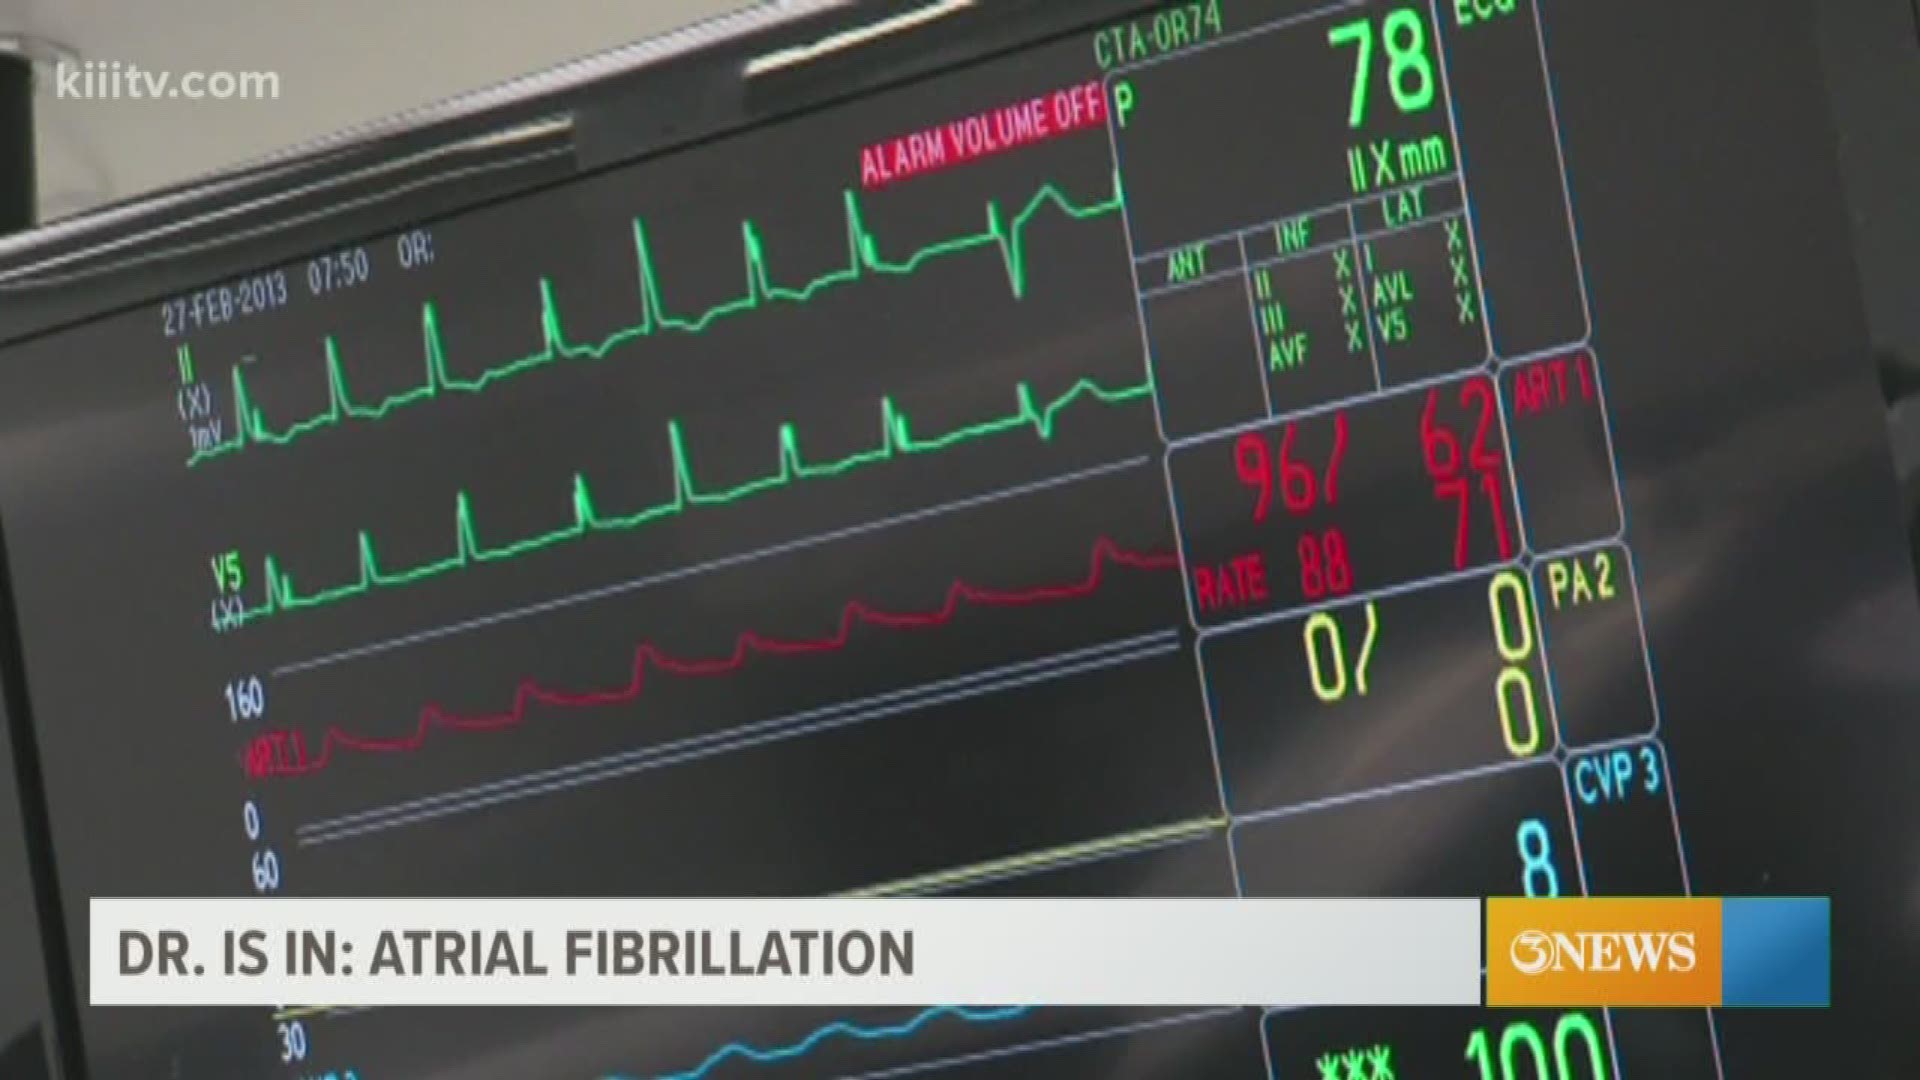 Blood clots, stroke and heart failure can all be tied to atrial fibrillation.